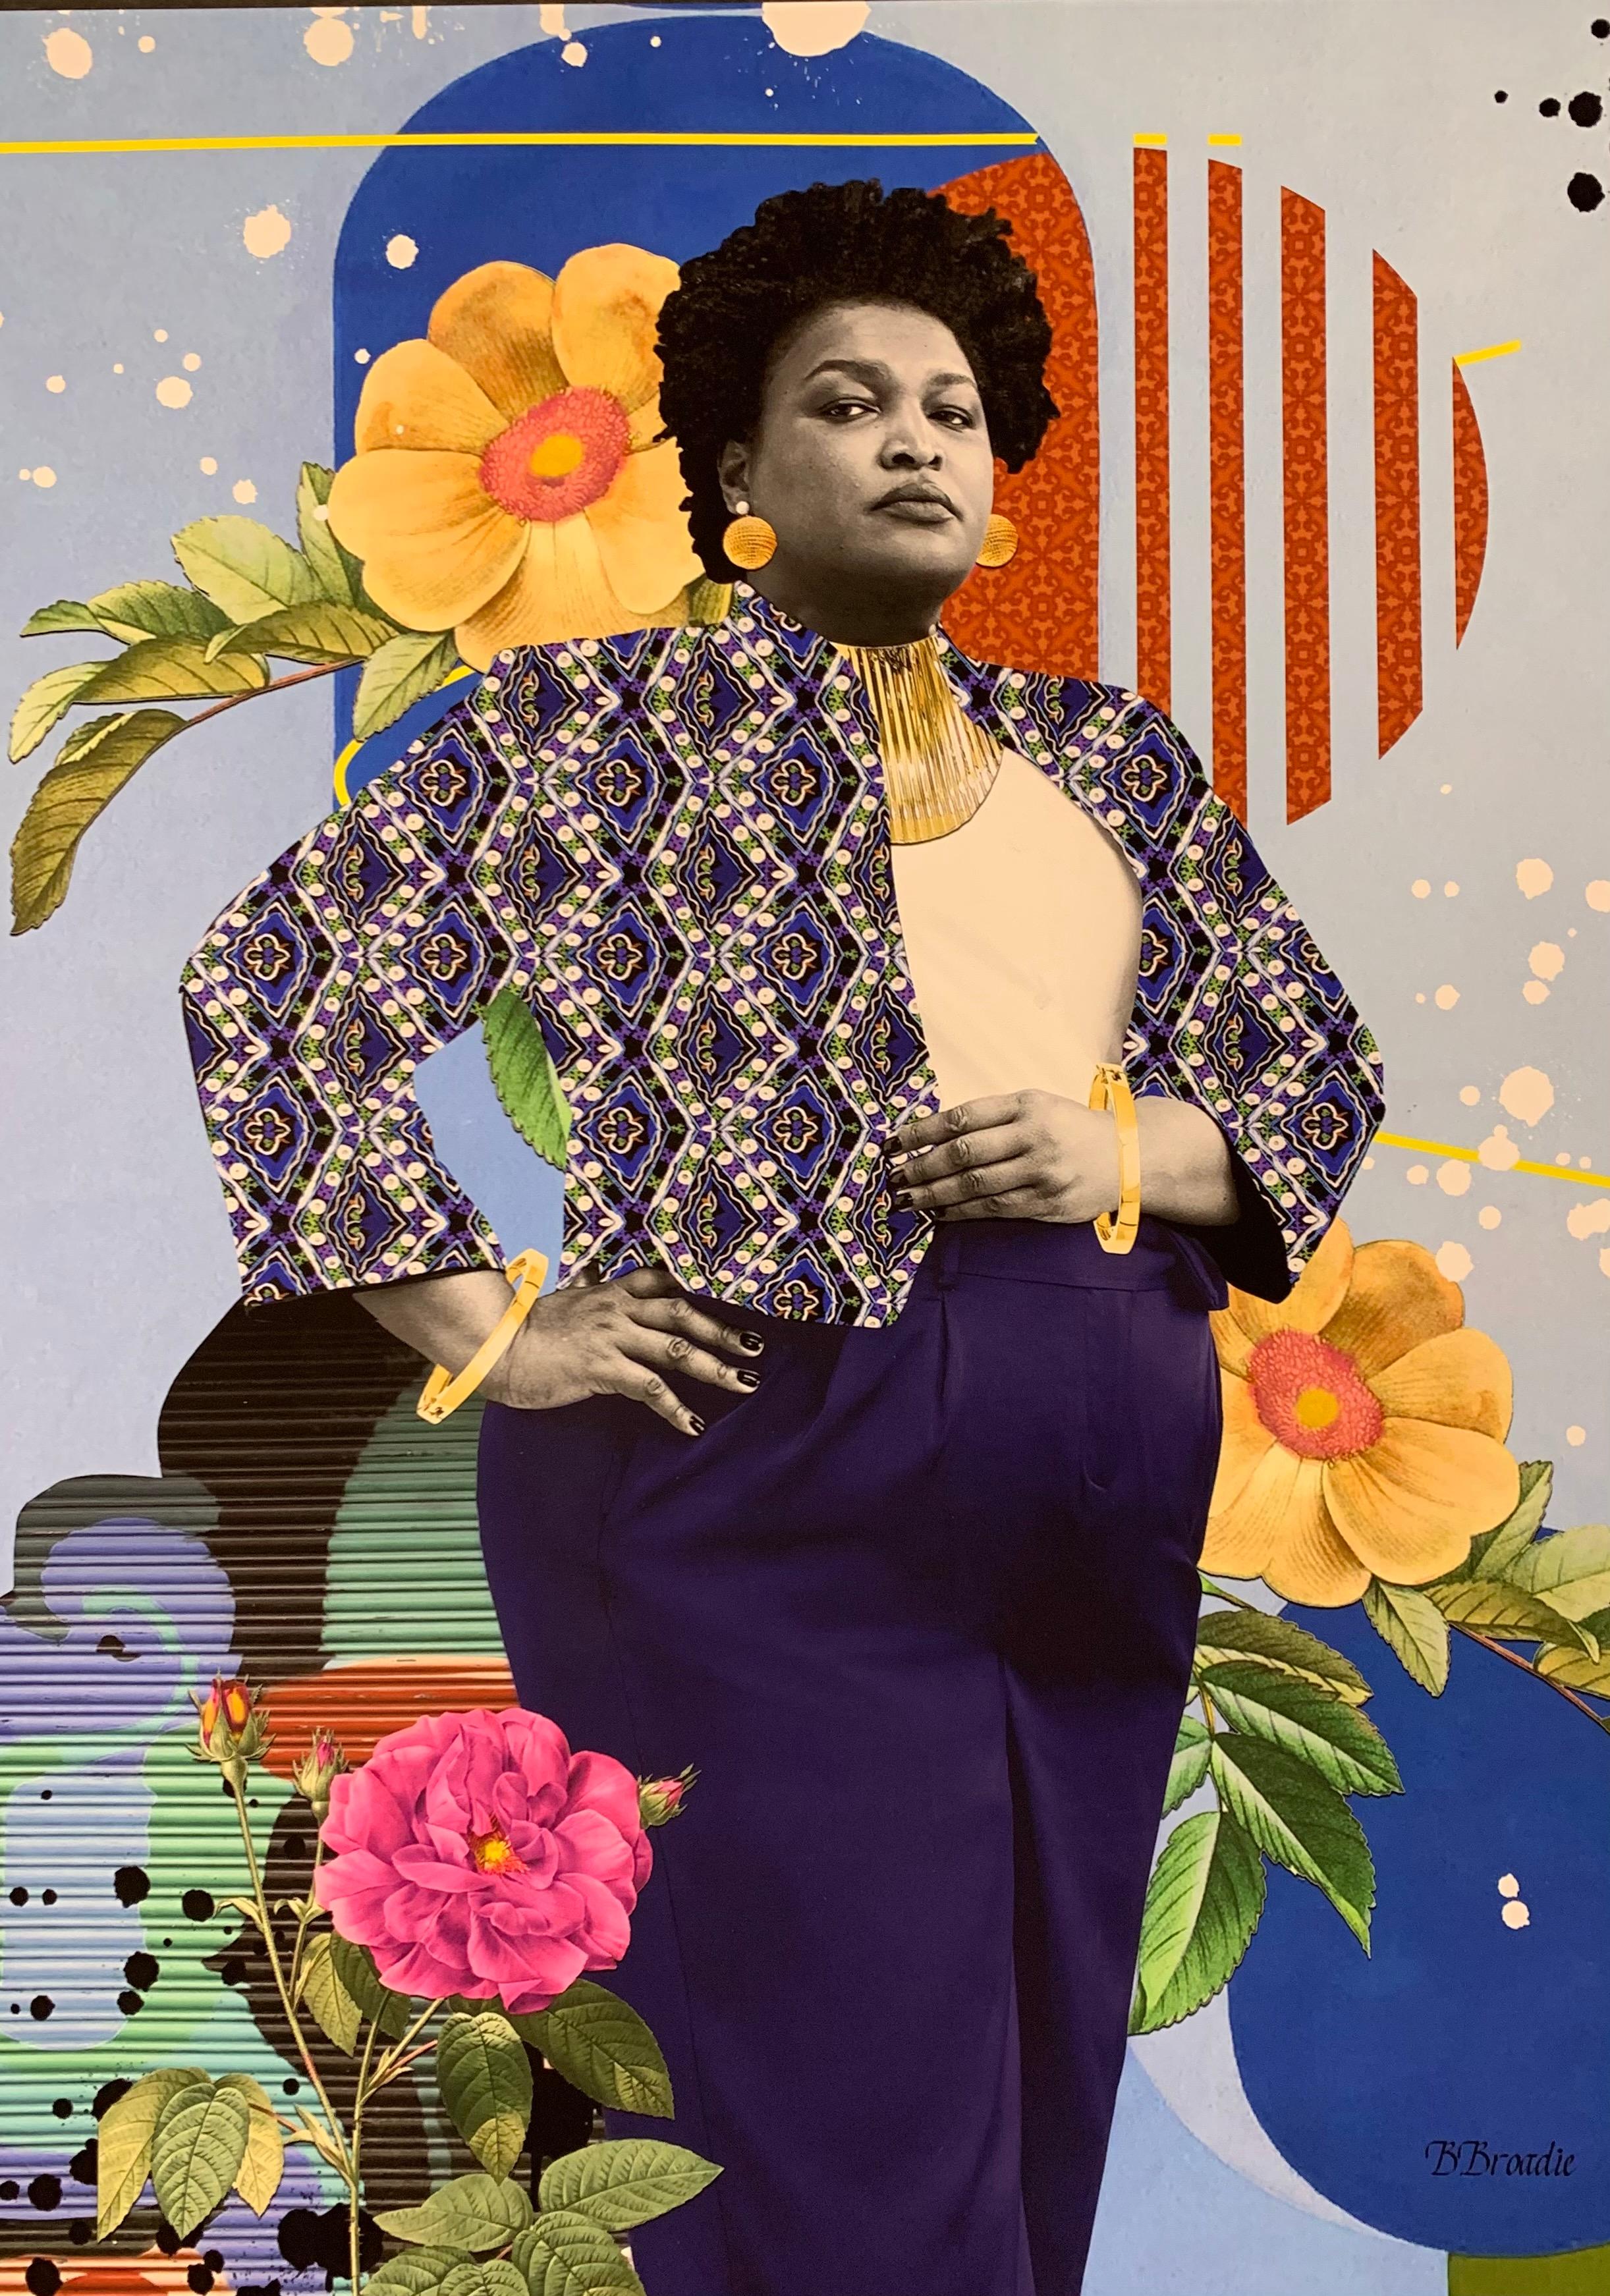 B. Brody Portrait Print - Pop Art Giclée "All Blue Everything: A Walk in the Park with Stacey Abrams Gold